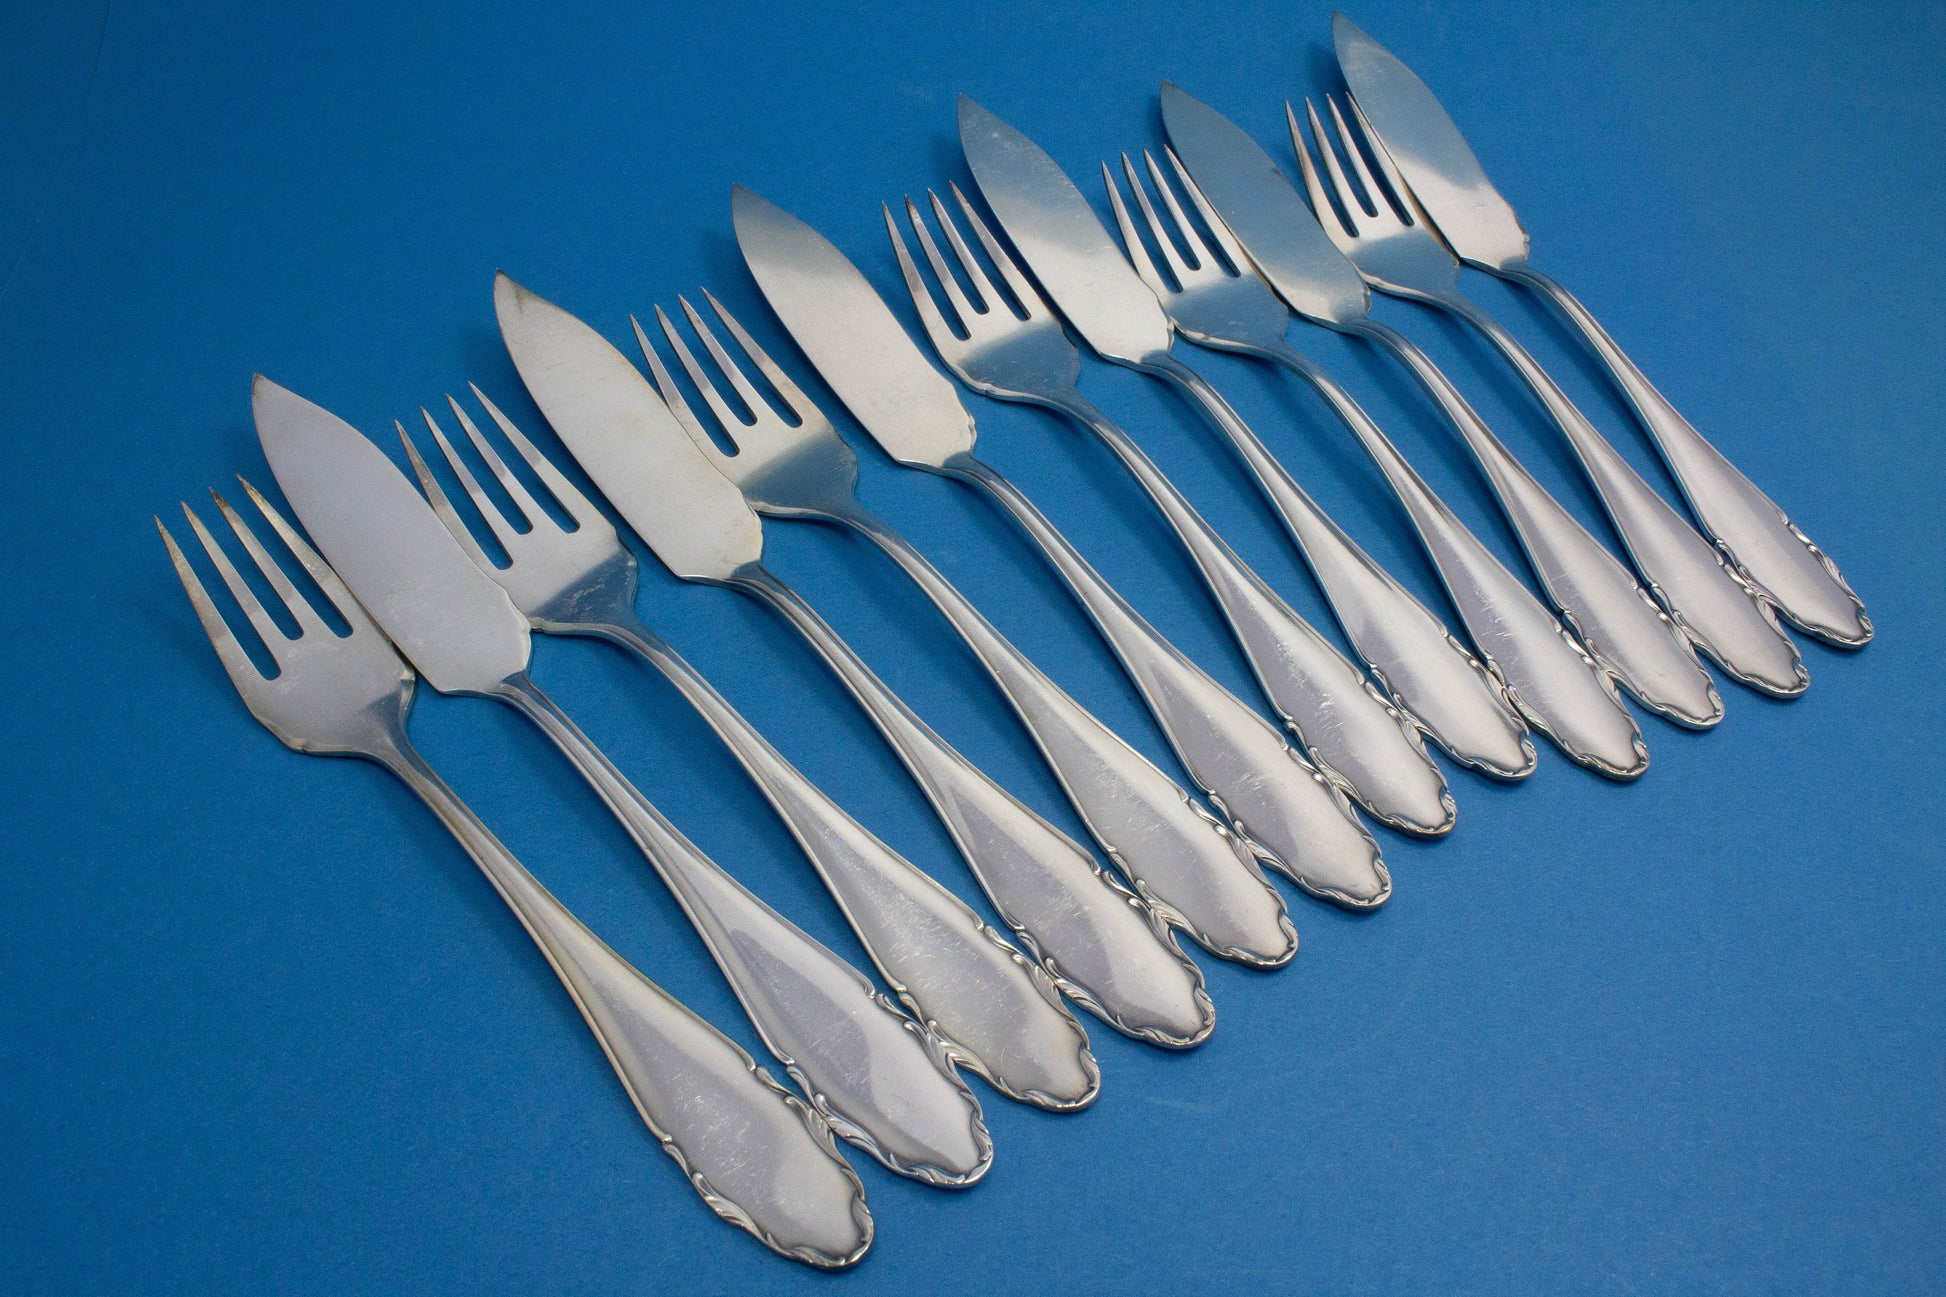 Art Nouveau fish cutlery set for 6 people by WMF, WMF 2200